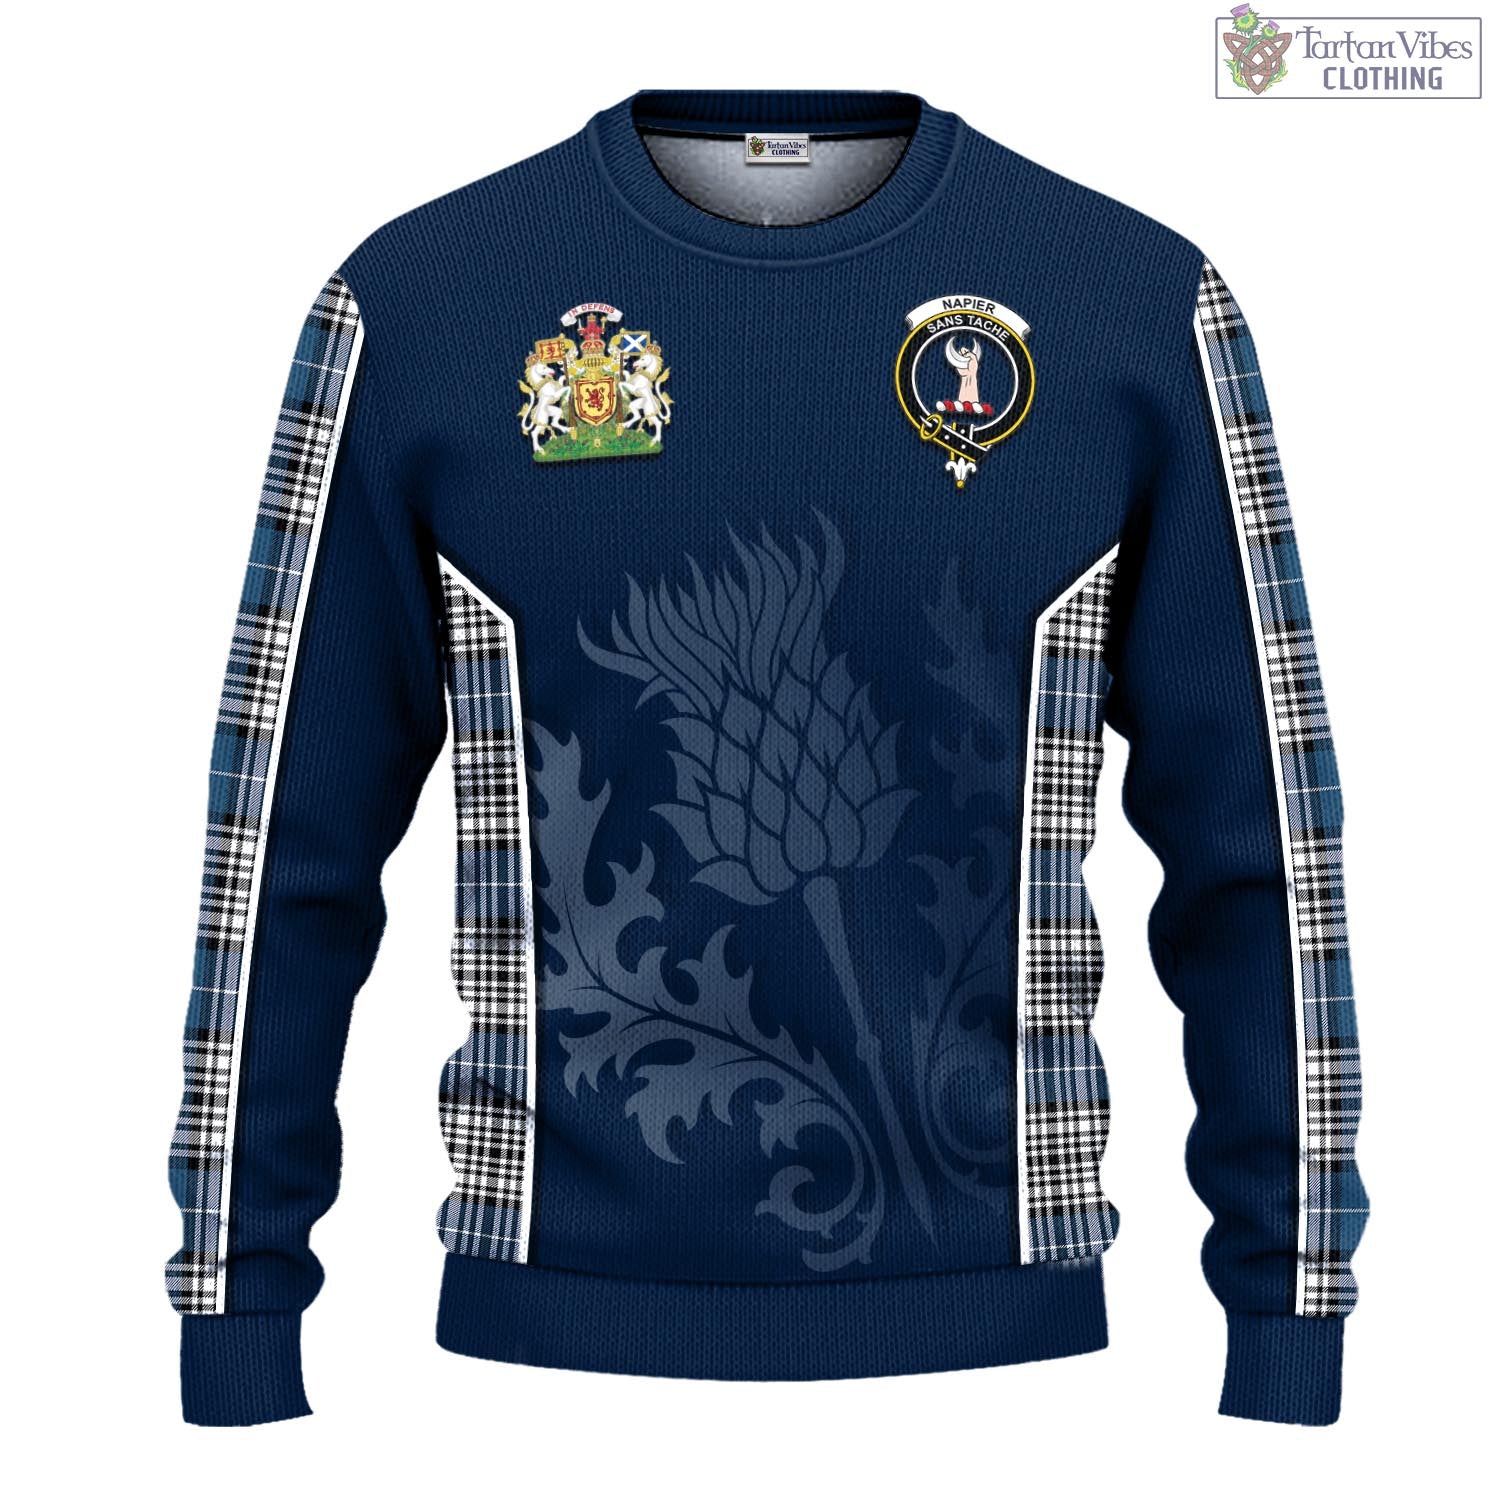 Tartan Vibes Clothing Napier Modern Tartan Knitted Sweatshirt with Family Crest and Scottish Thistle Vibes Sport Style